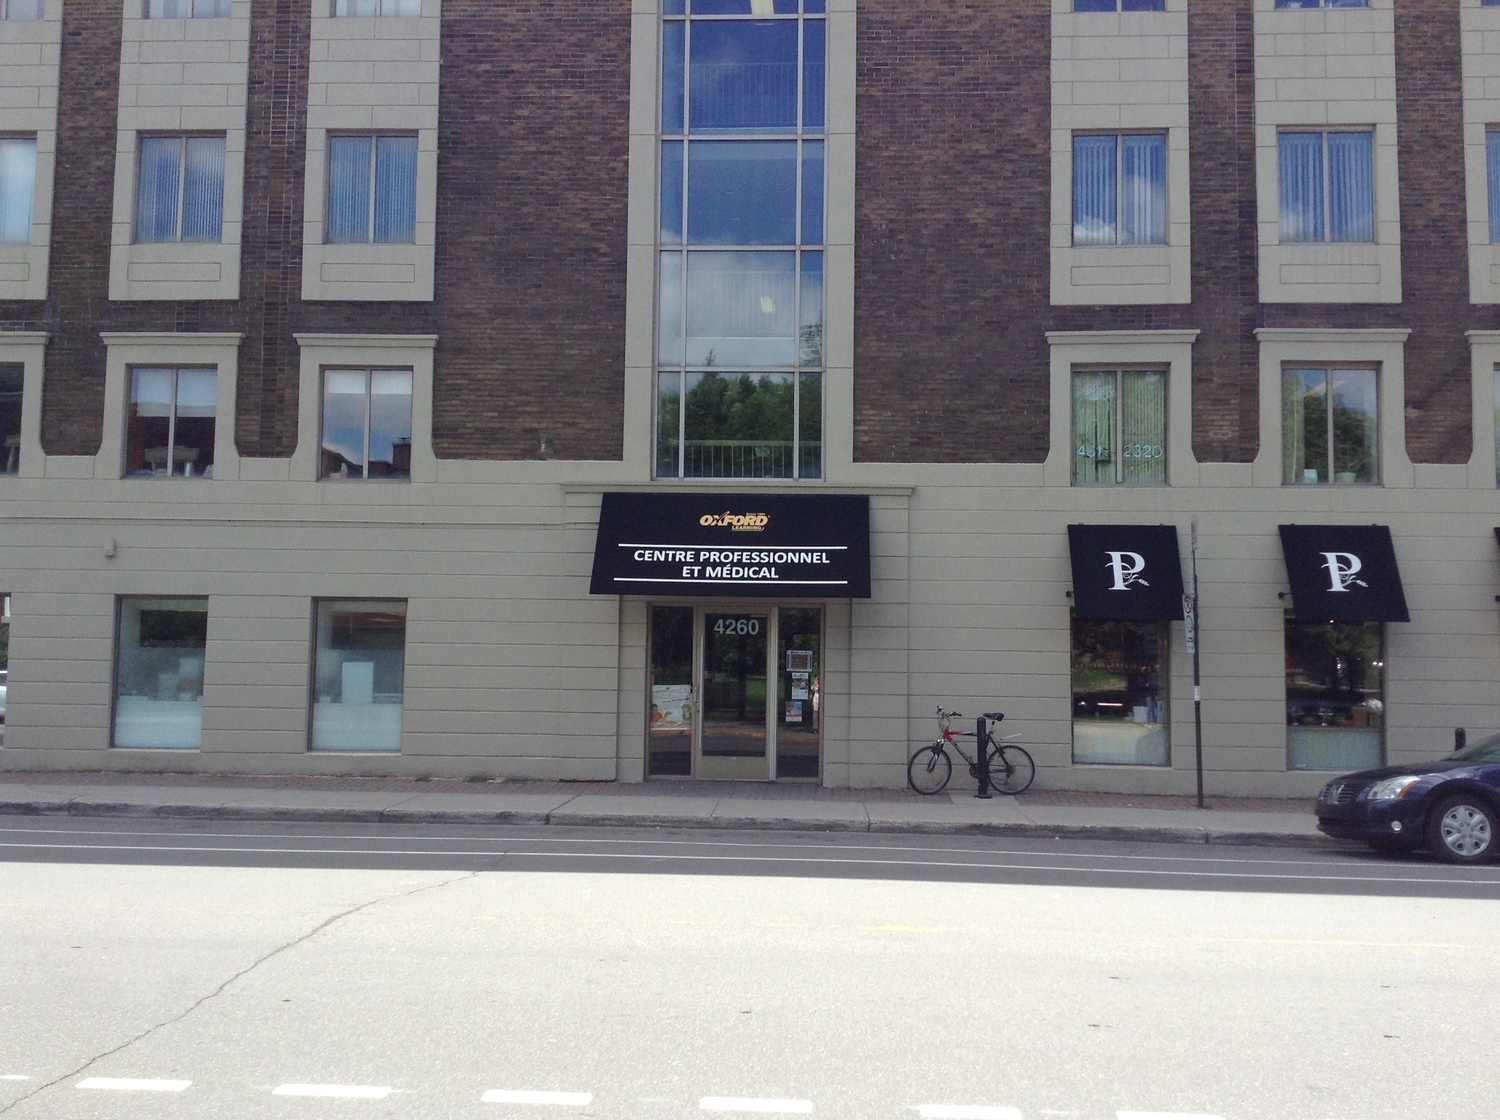 Gallery Photo of Office entrance on Girouard Avenue at the corner of Monkland Avenue